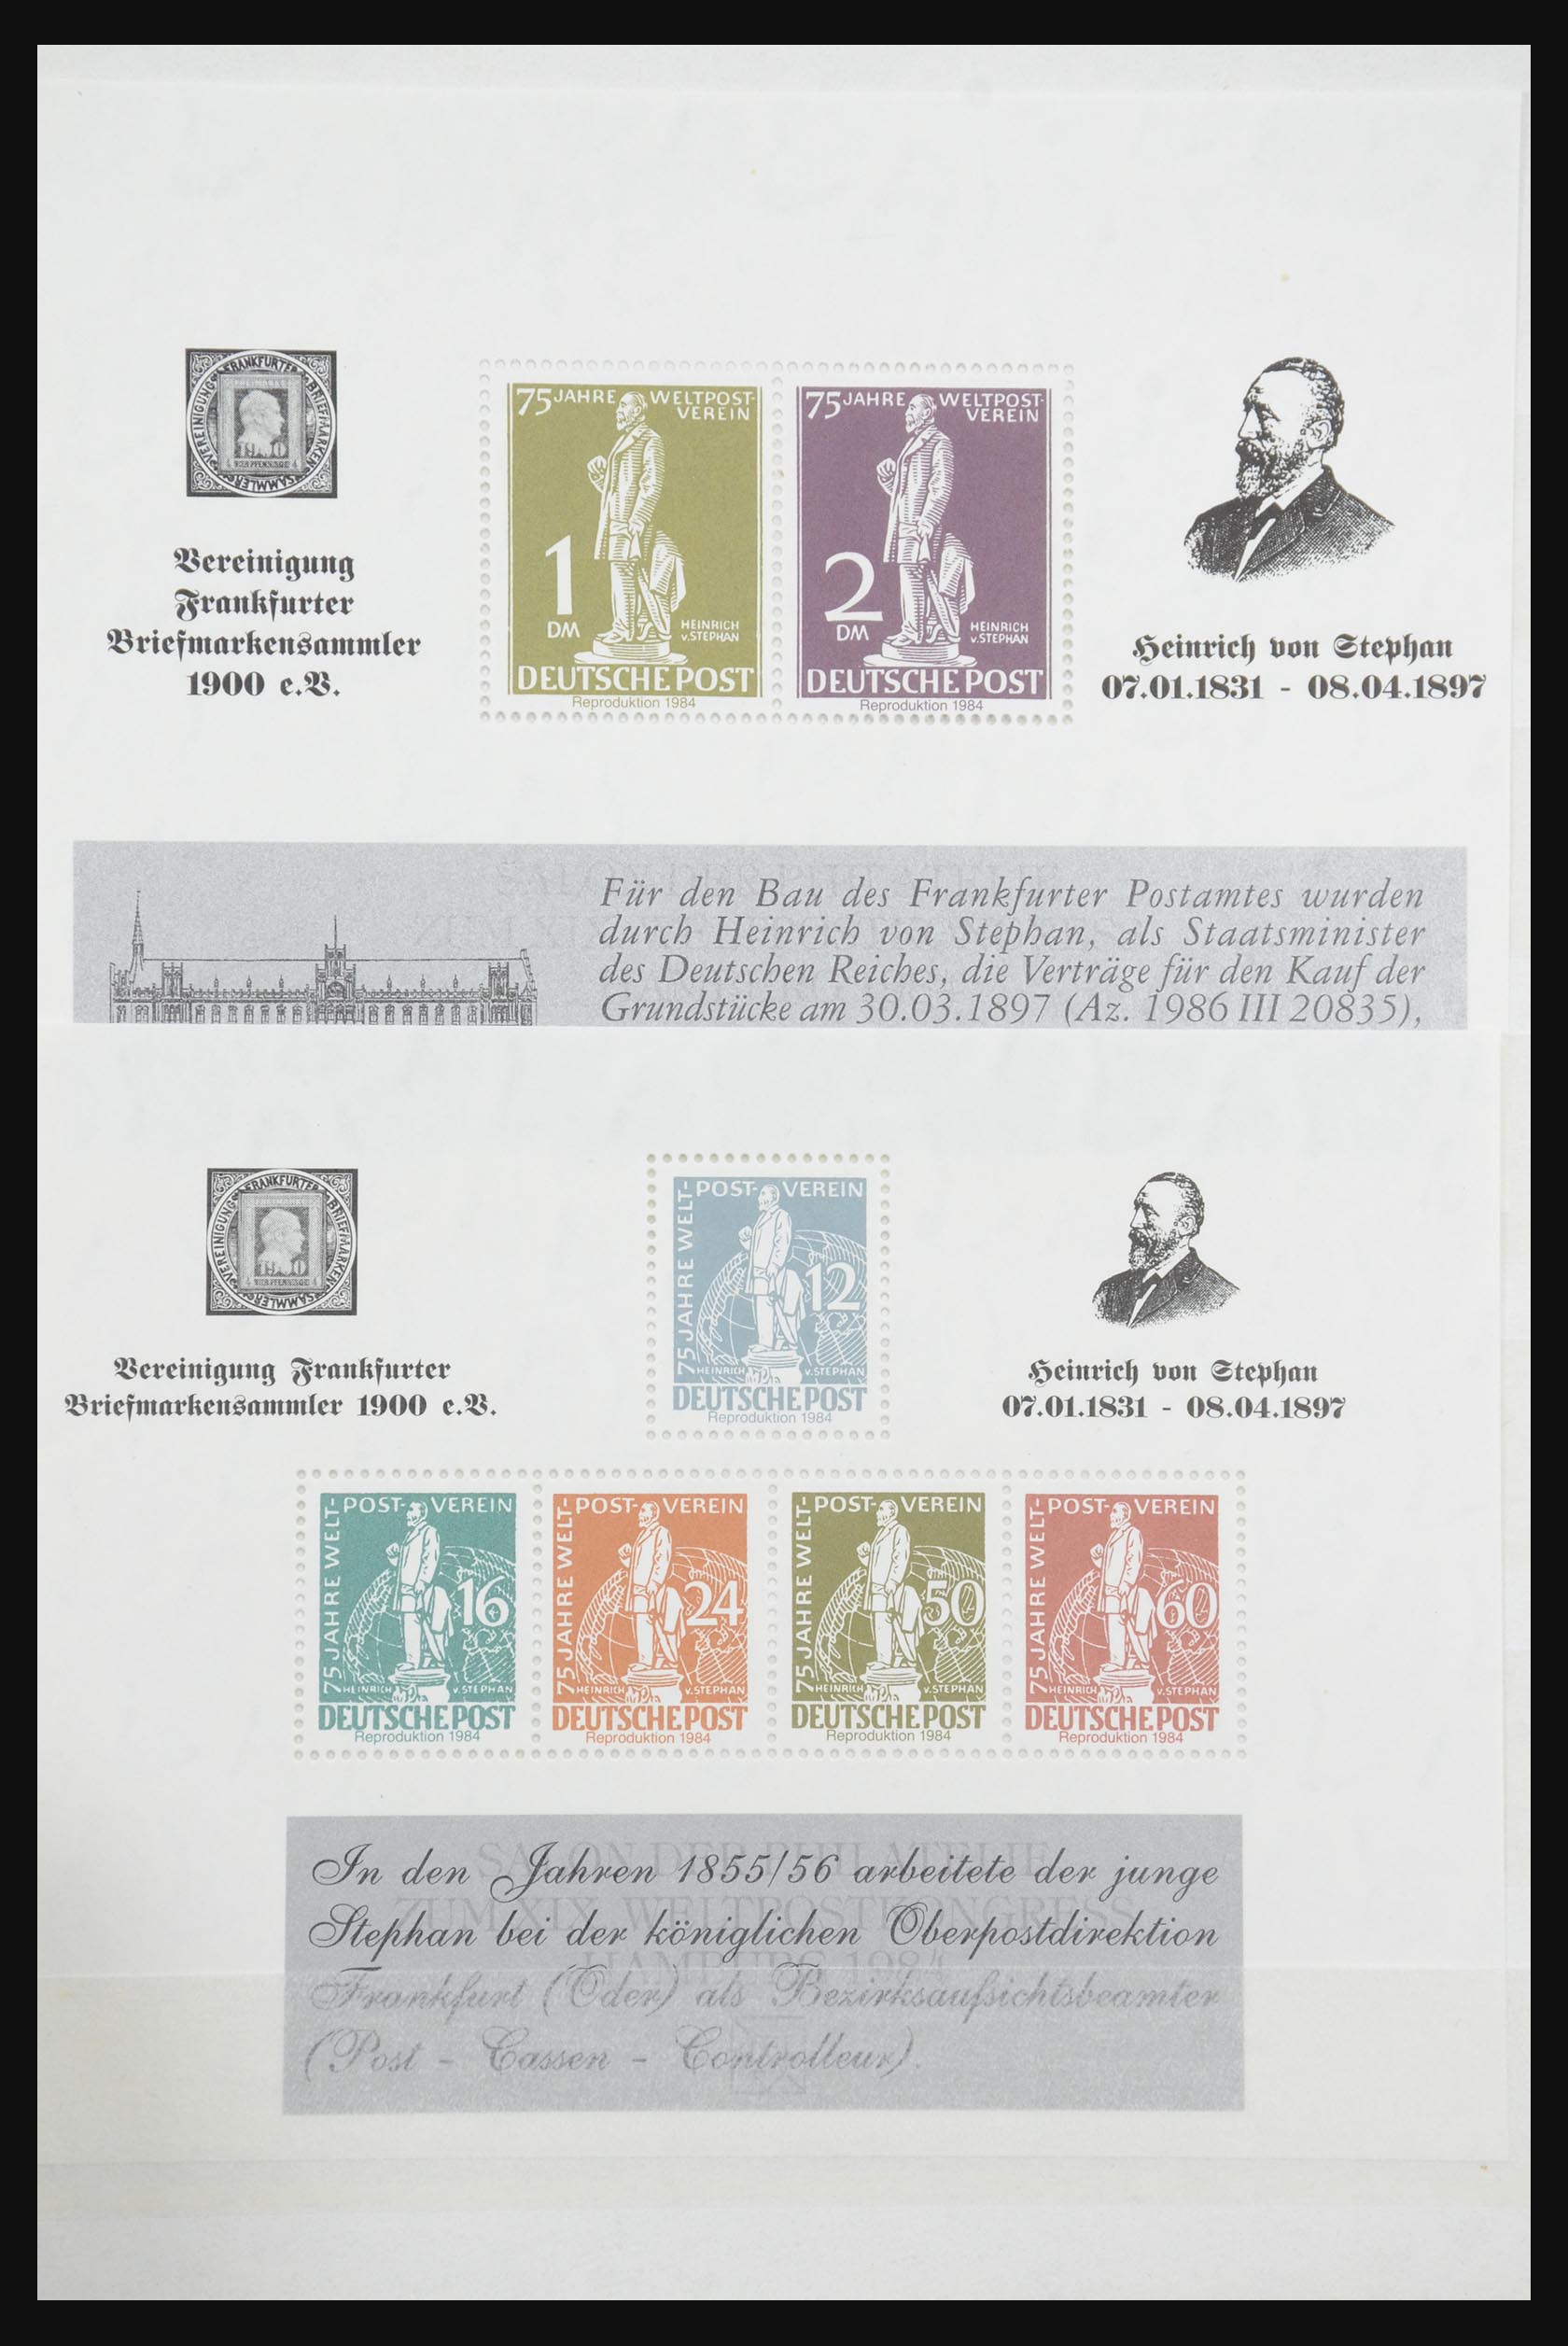 32050 046 - 32050 Bundespost special sheets 1980-2010.